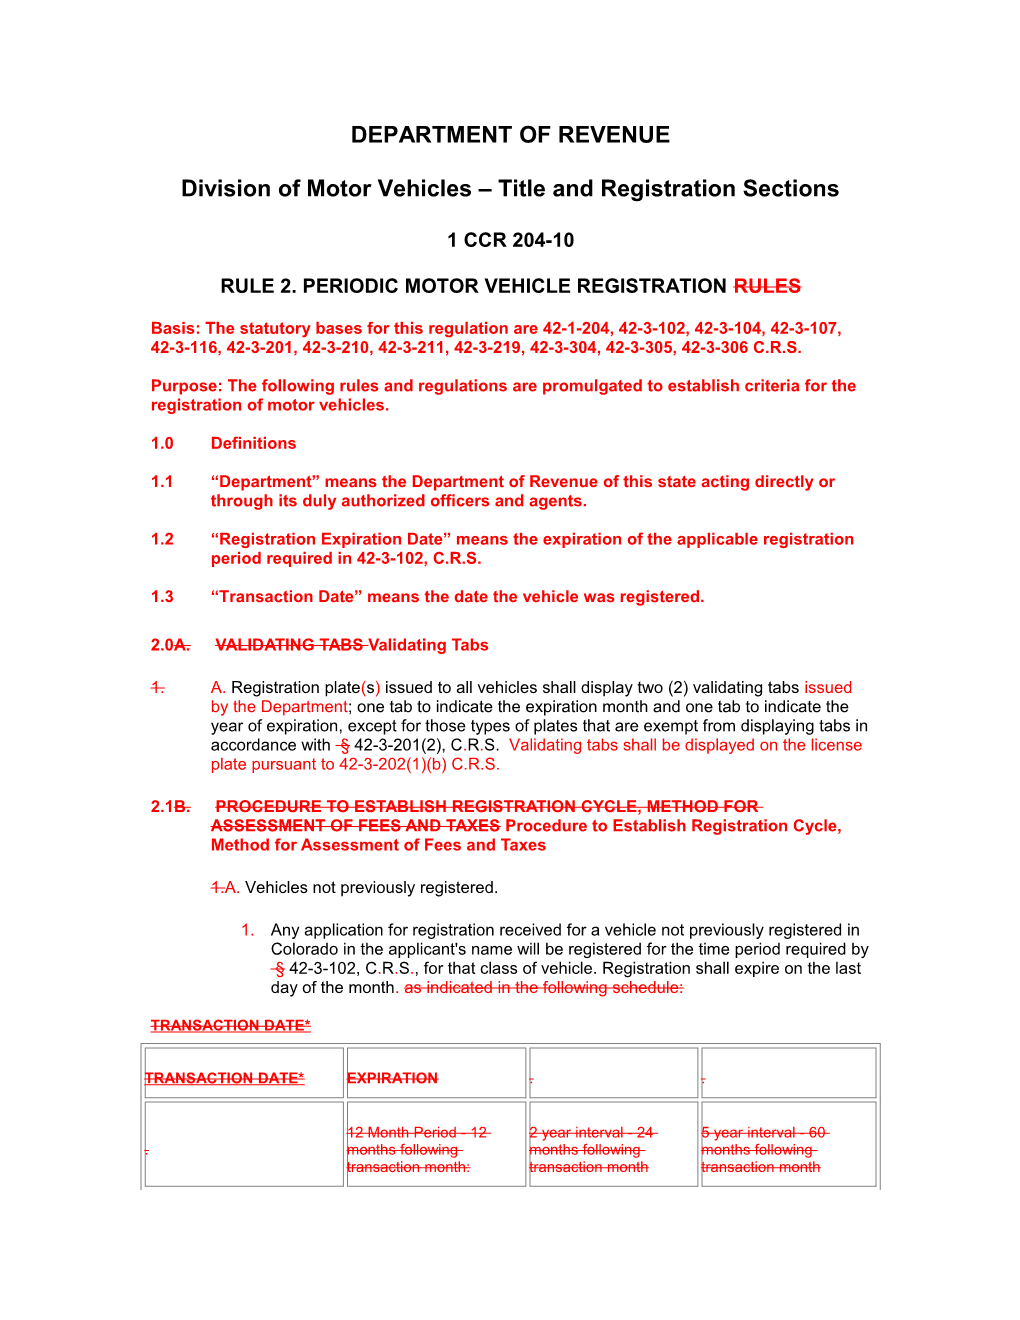 Periodic Motor Vehicle Registration Rules